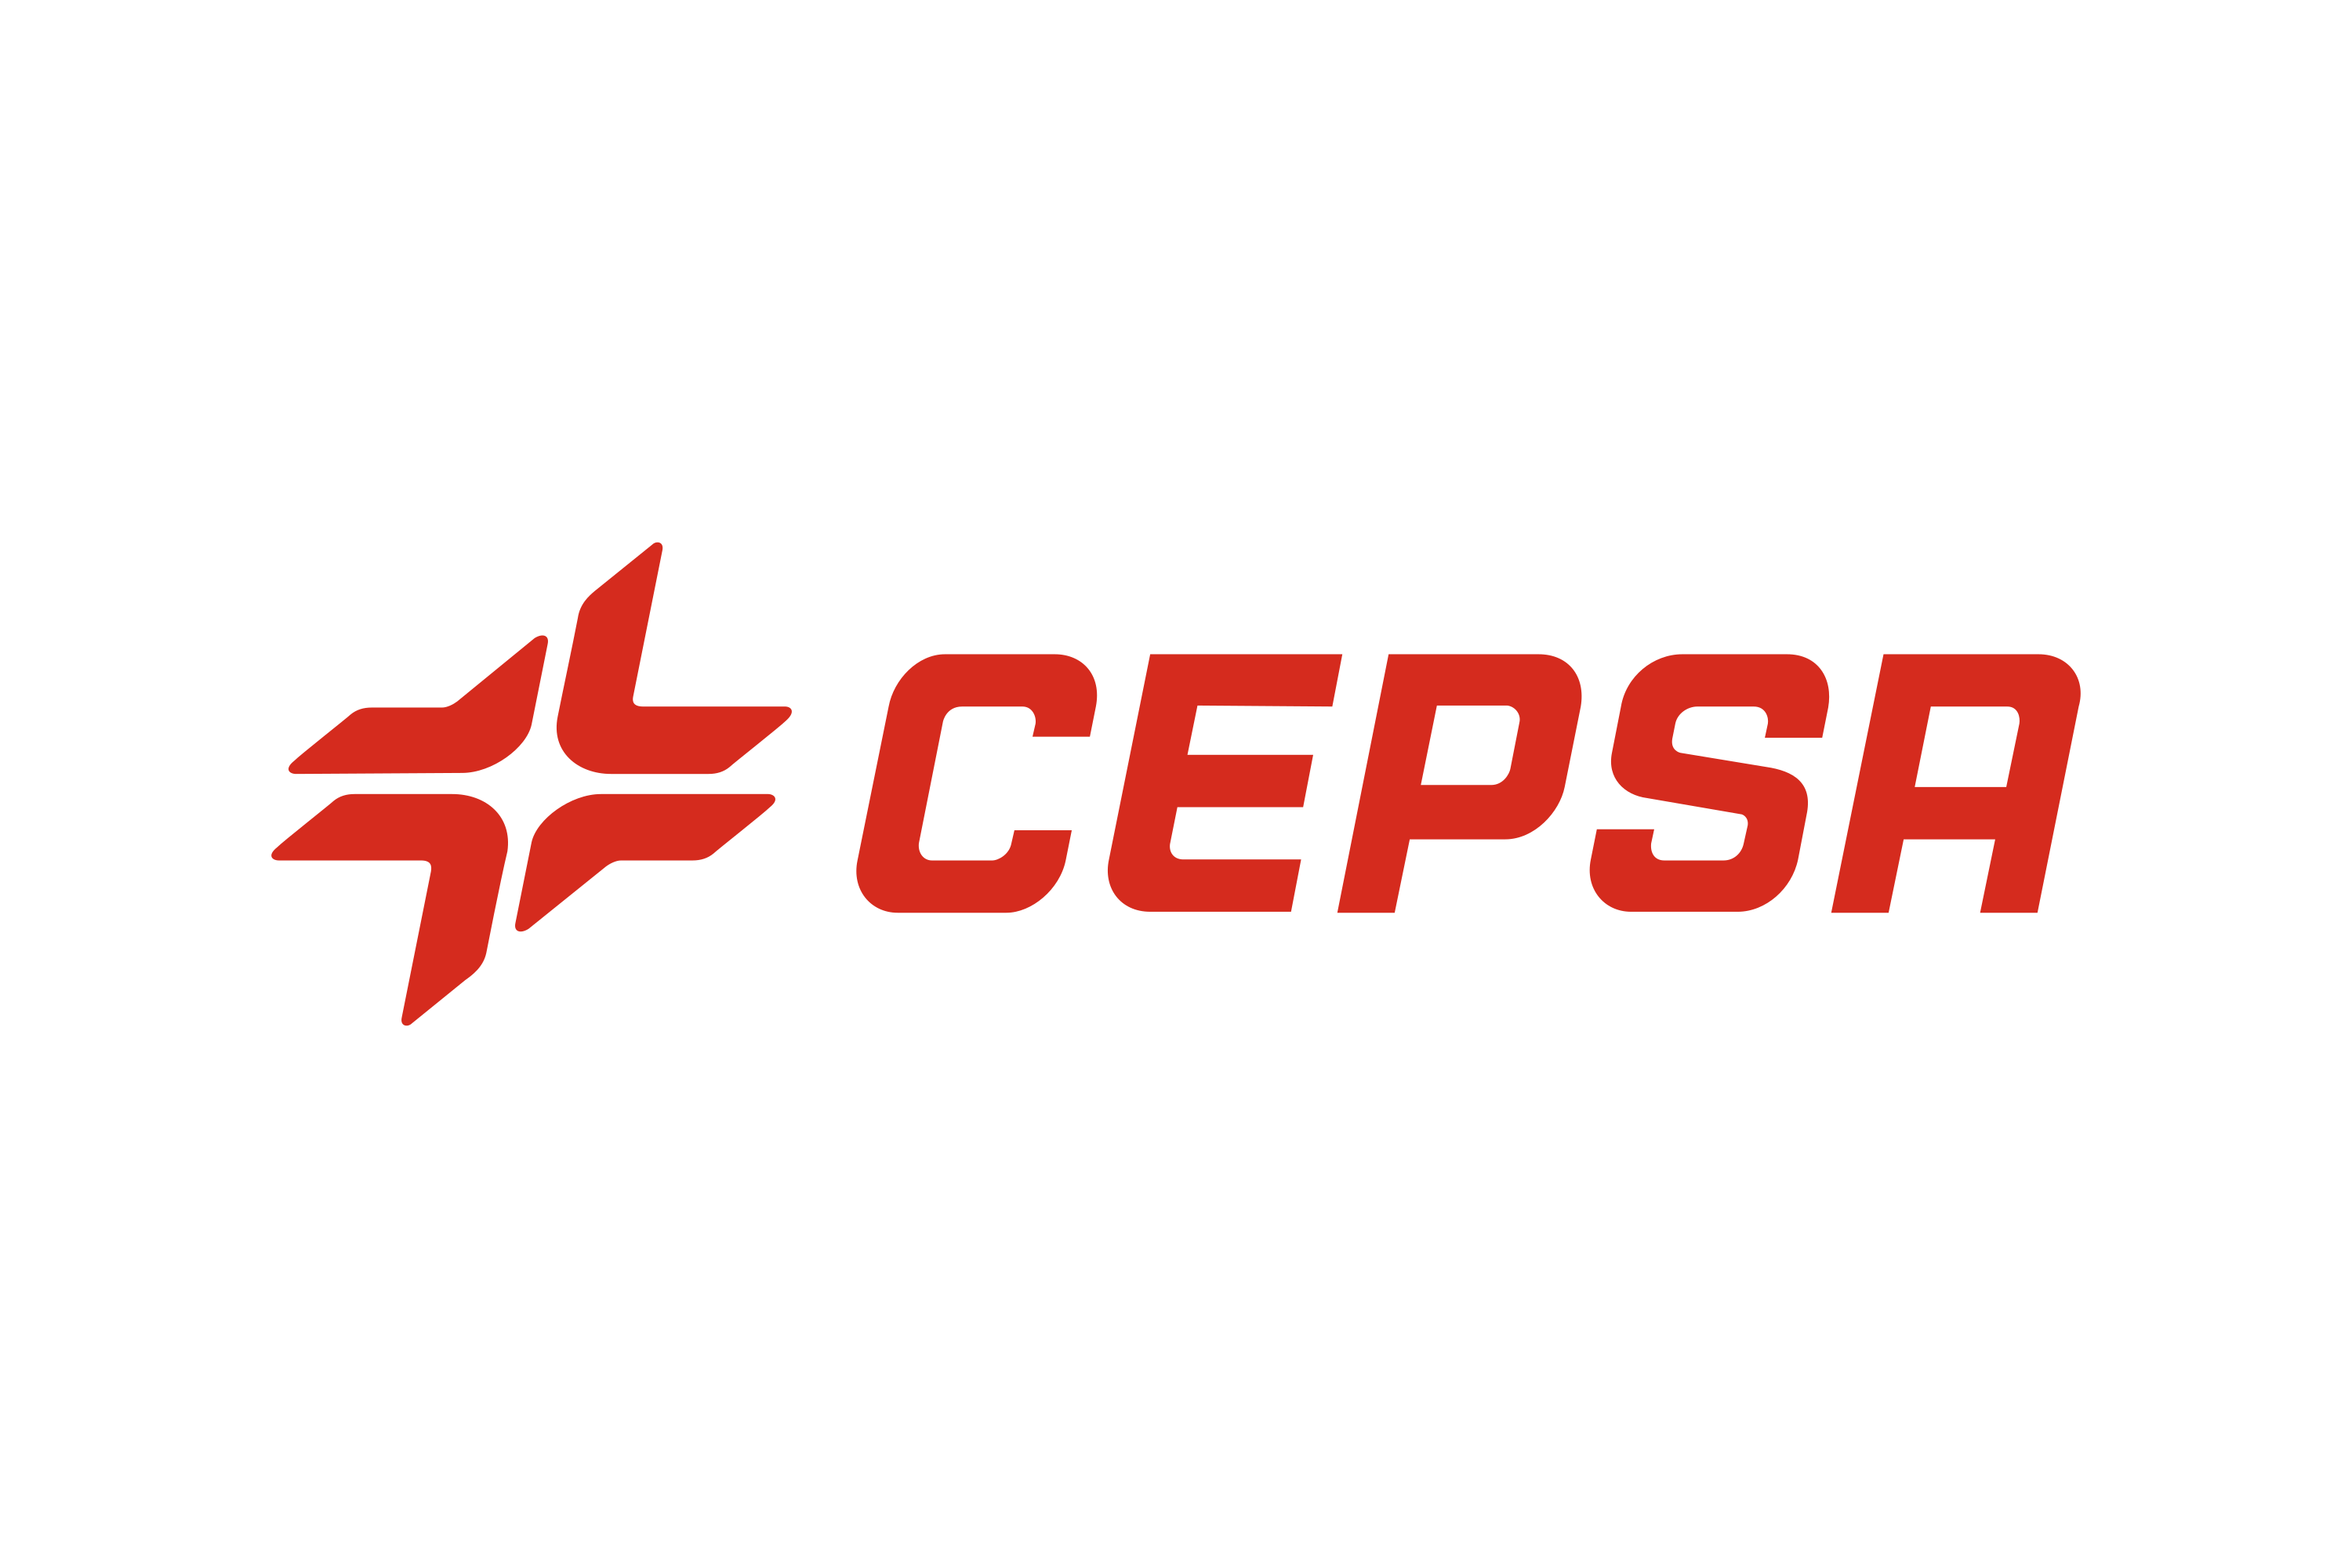 Download Spanish Petroleum Company (Cepsa) Logo in SVG Vector or PNG